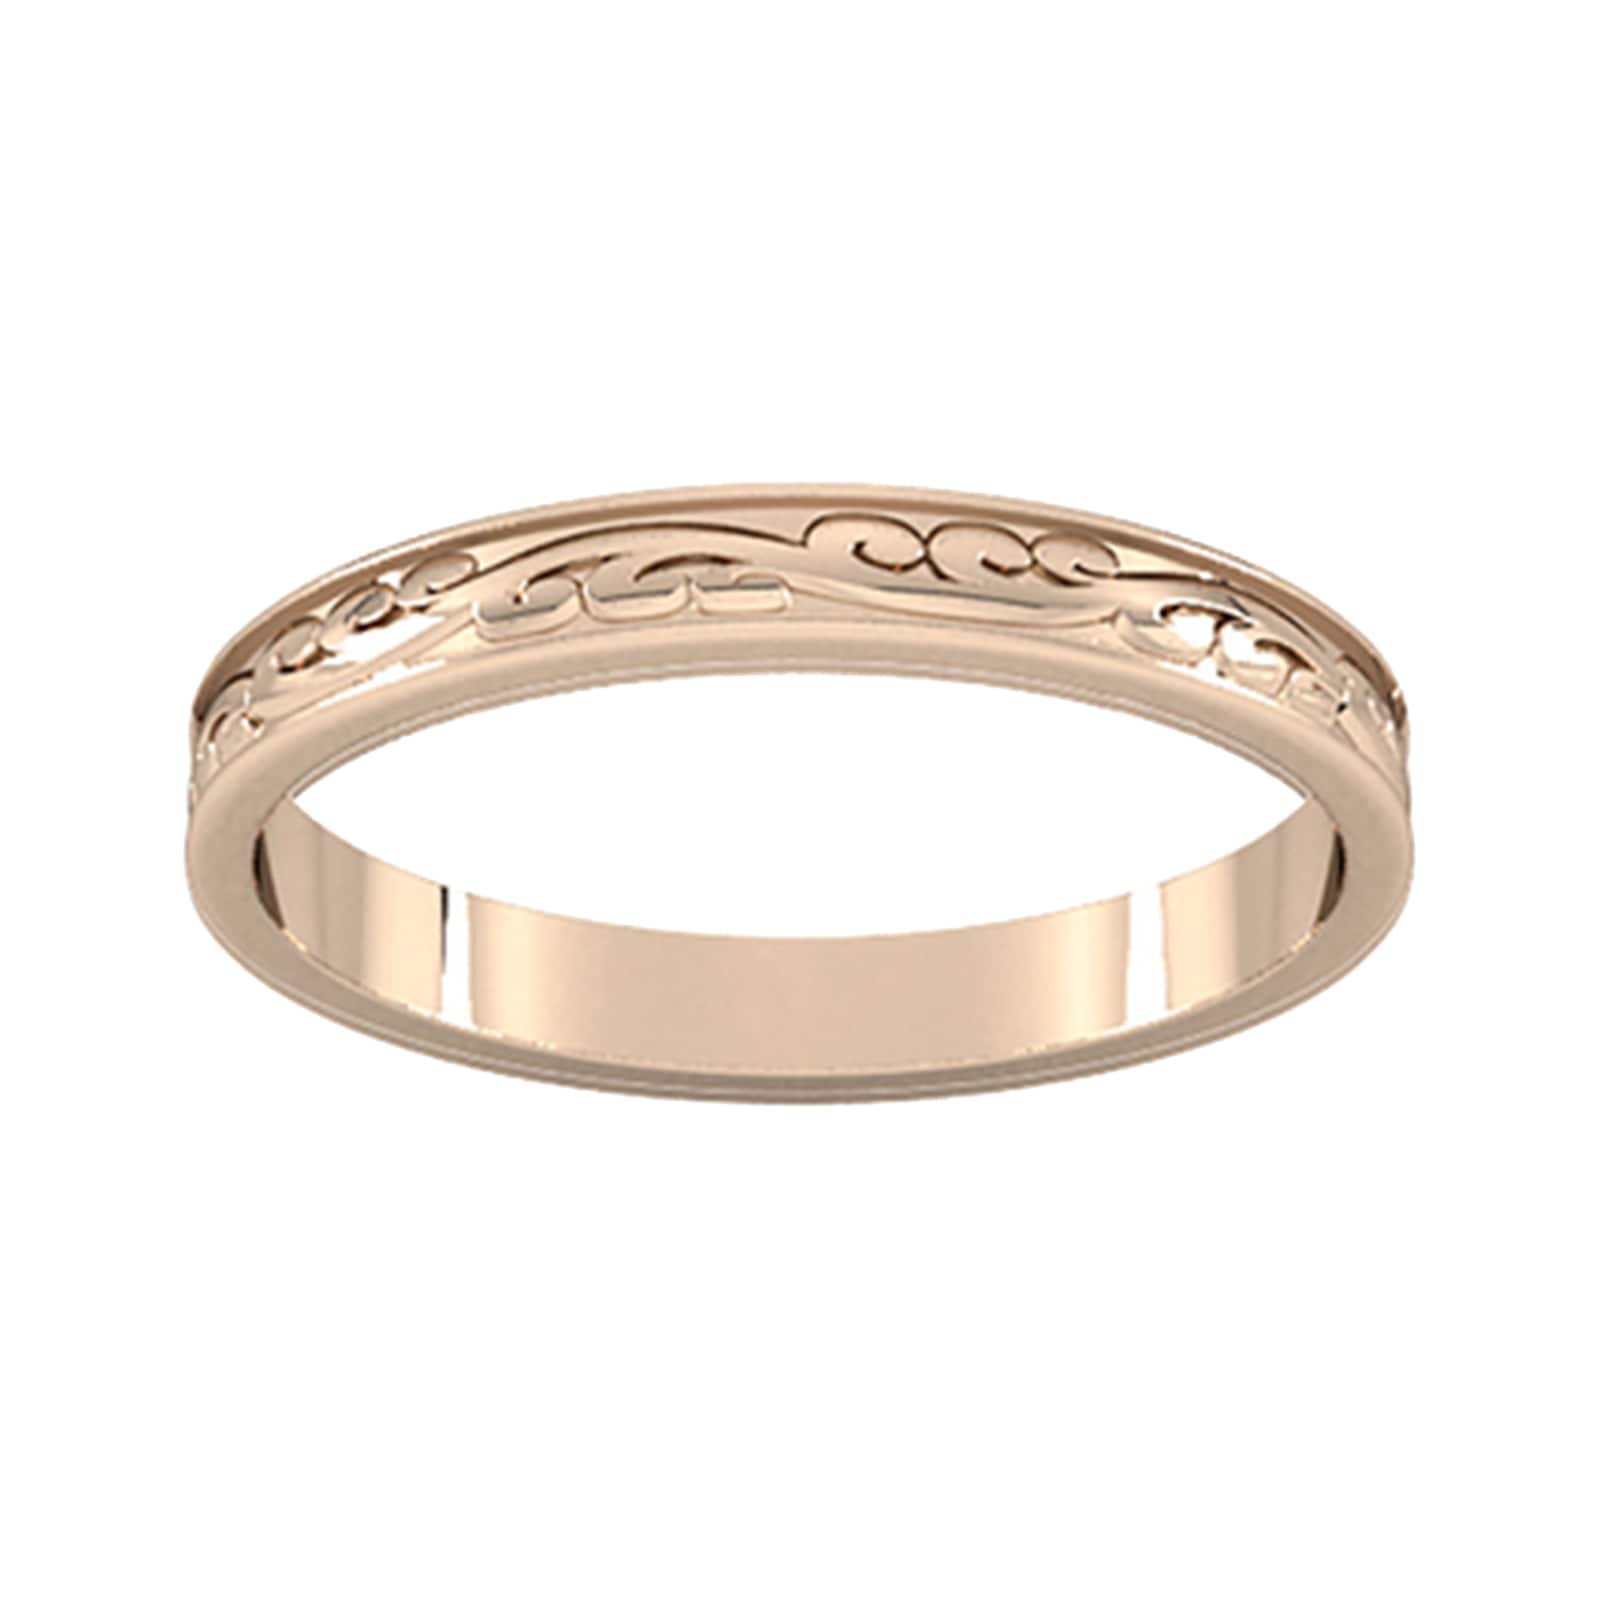 2.5mm Hand Engraved Wedding Ring In 9 Carat Rose Gold - Ring Size X